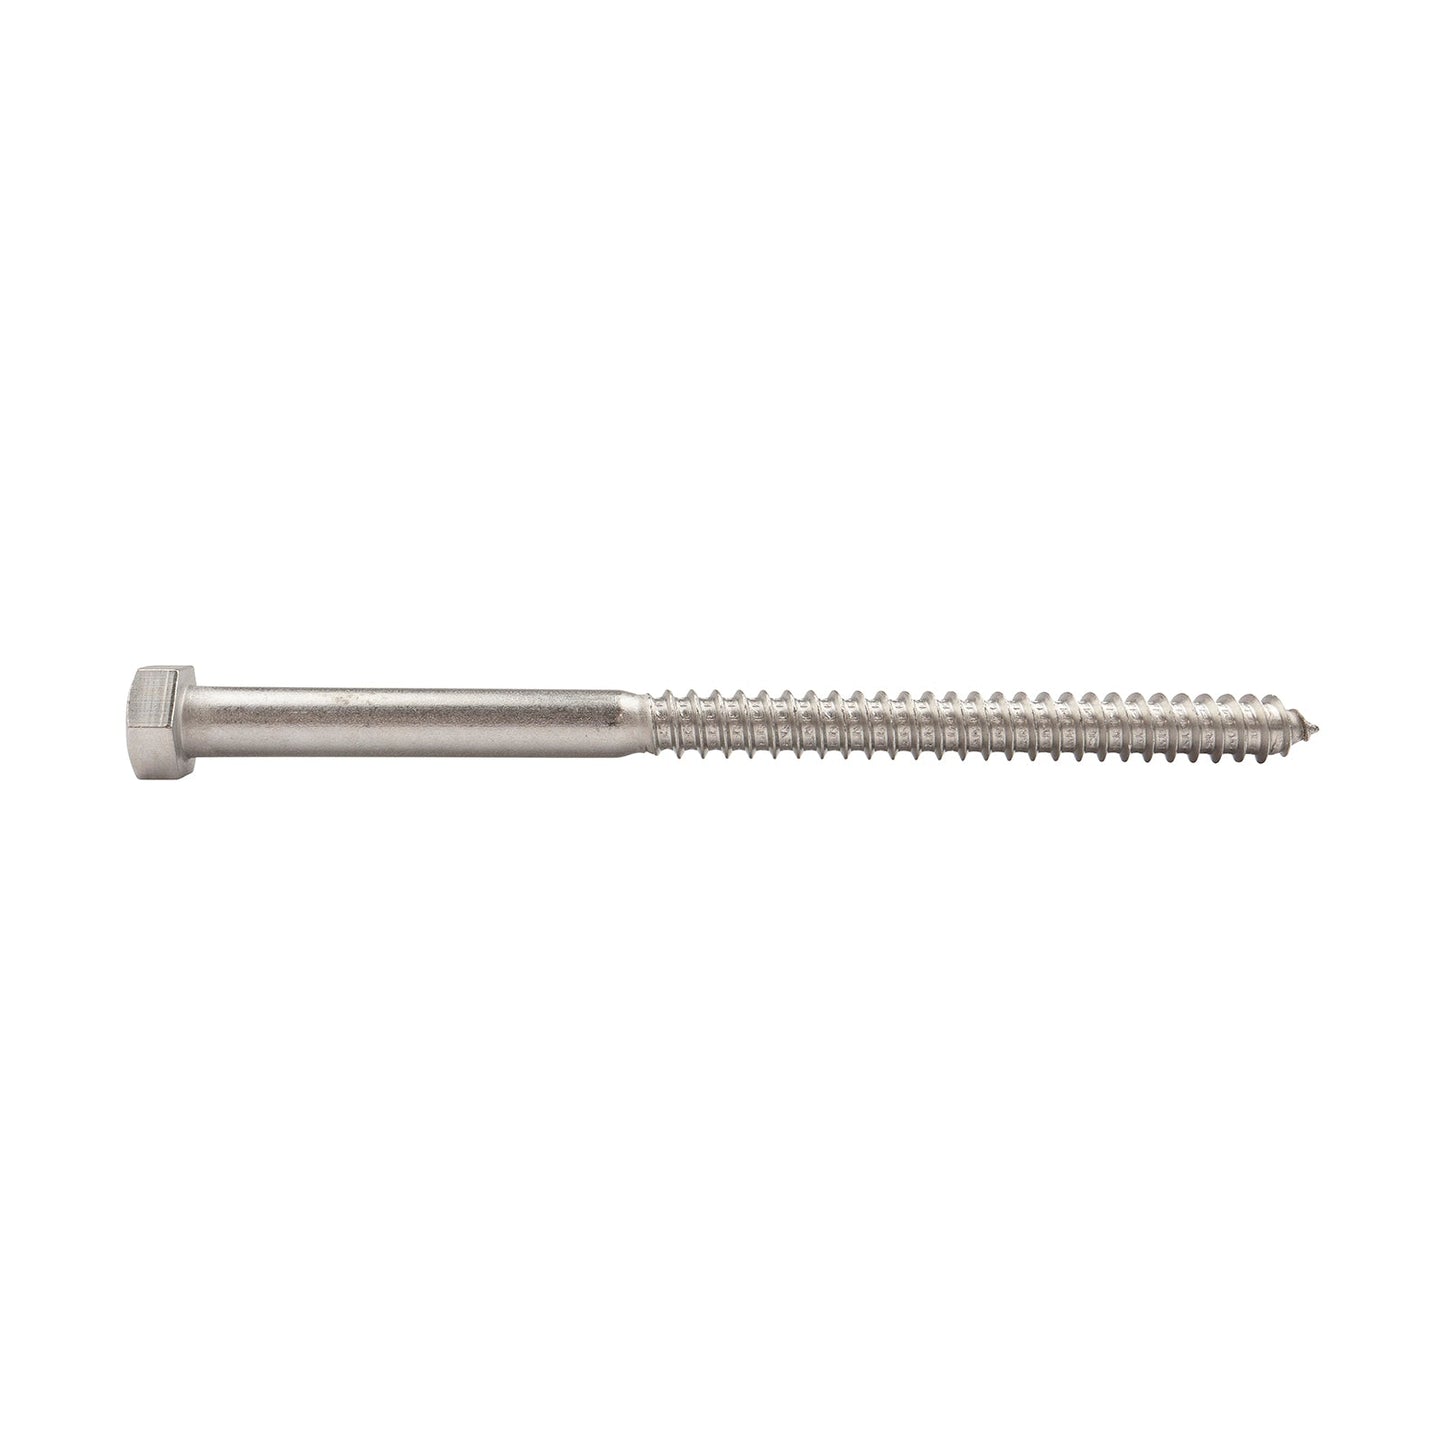 1/2"-6 x 8" Conquest Hex Head Lag Bolt for Wood - 316 Stainless Steel